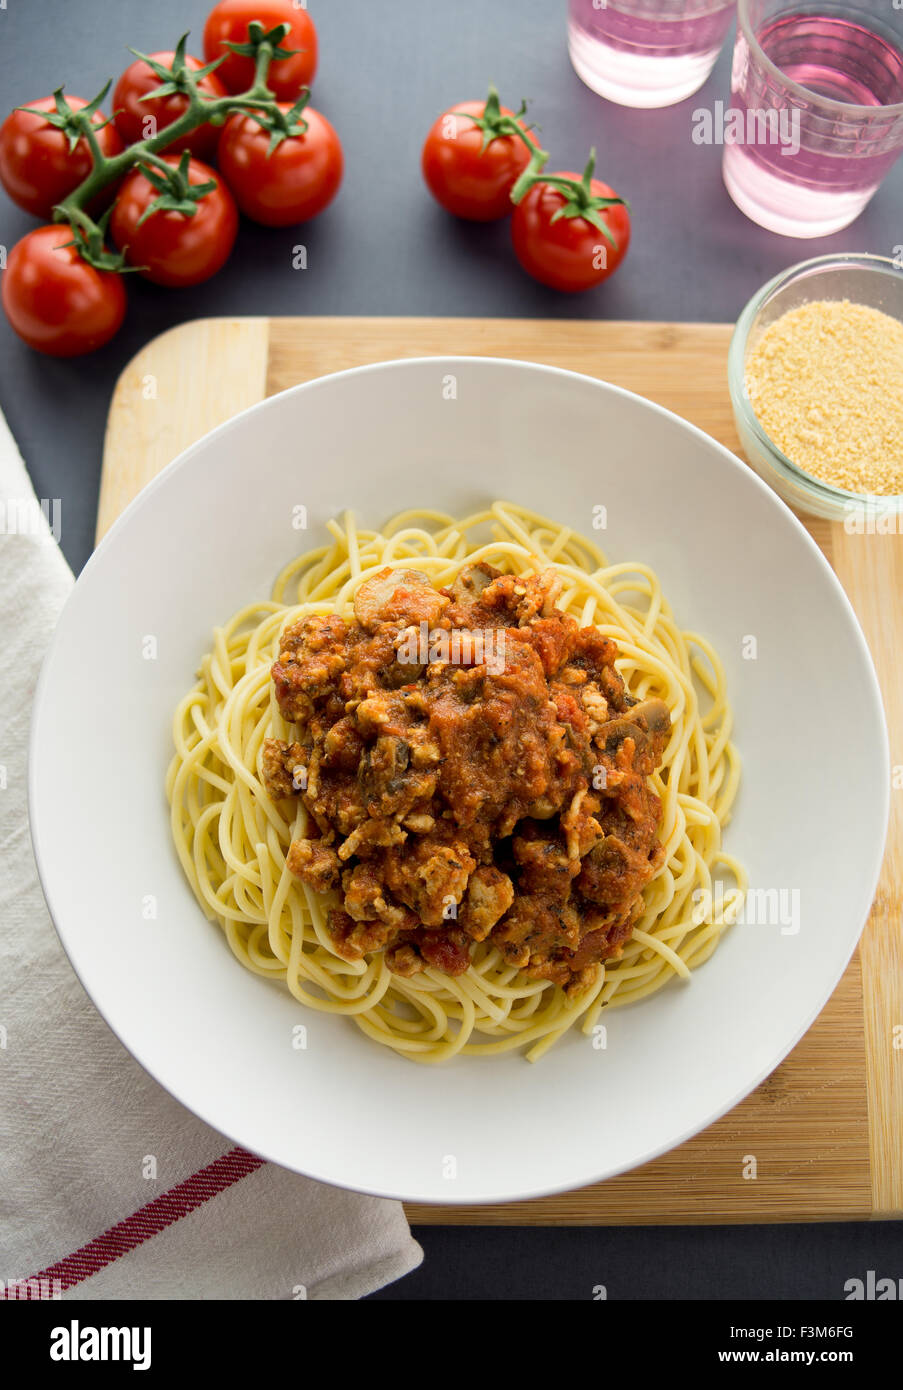 Bolognese sauce made with ground chicken served on top of spaghetti pasta in a white bowl. Aerial view with ingredients and cond Stock Photo